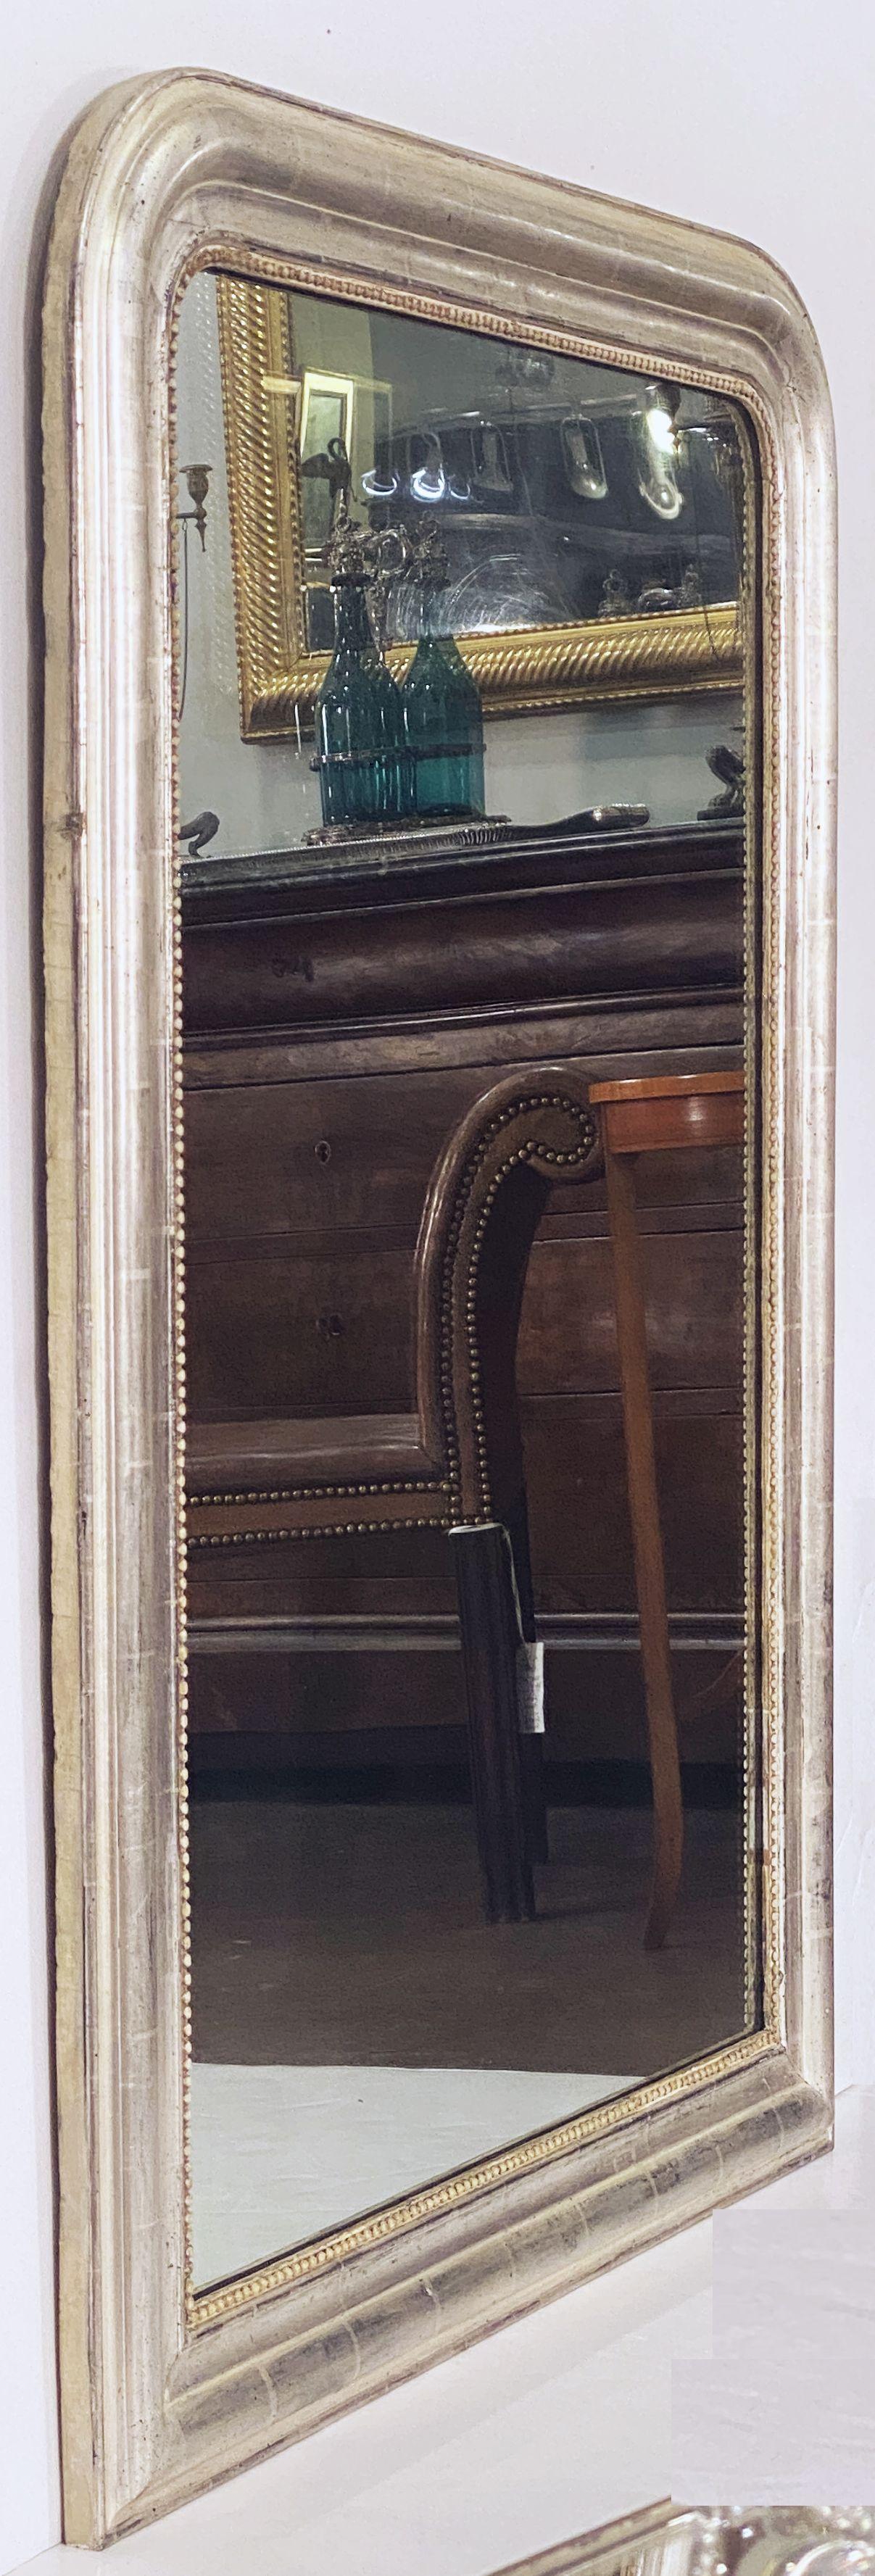 A fine tall Louis Philippe wall or dressing console mirror from France, featuring a moulded surround with a beautiful patinated silver-leaf.

Dimensions: H 47 1/4 inches x W 35 1/4 inches

Other sizes available in this style.

